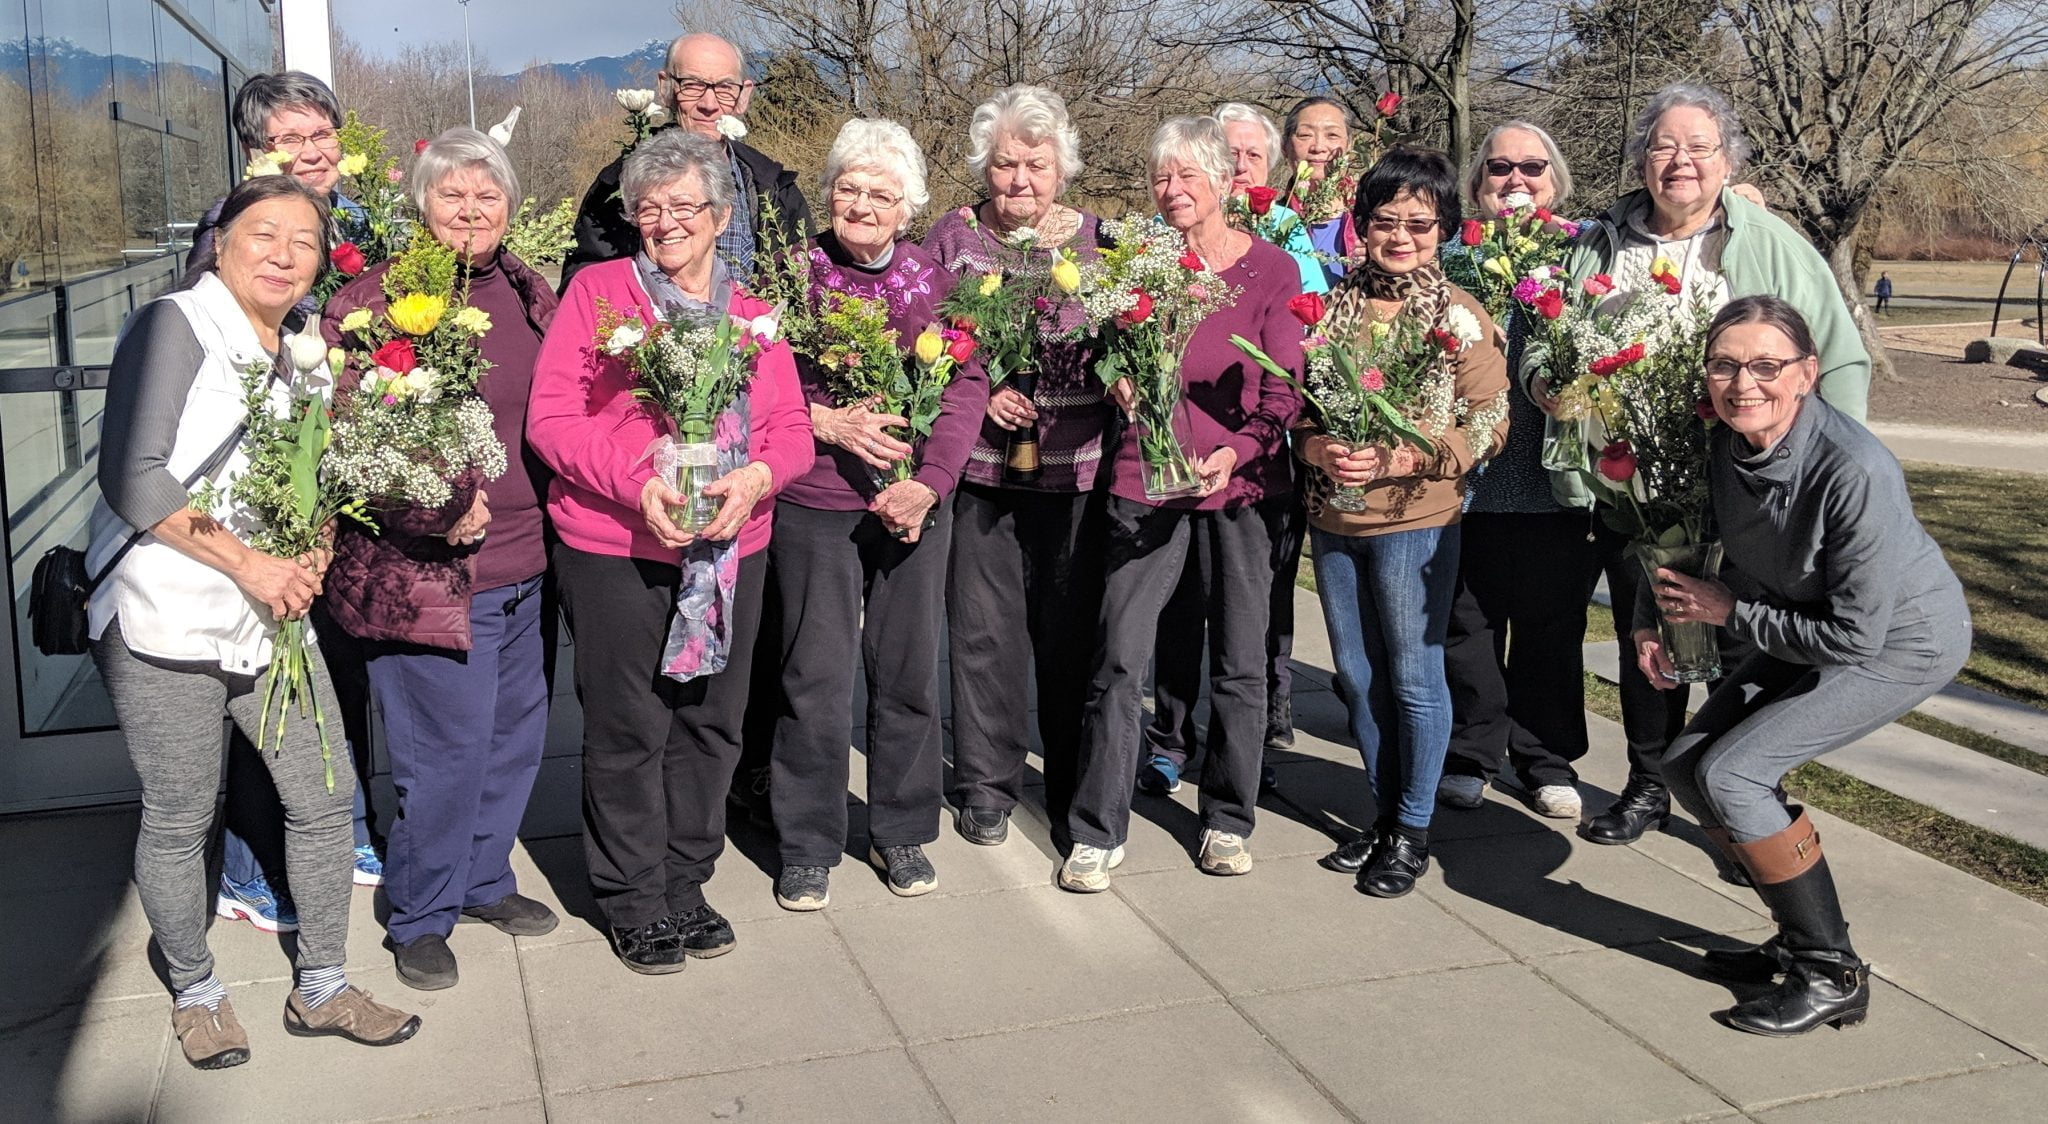 a group photo of Trout Lake seniors holding floral arrangements outside in the sun